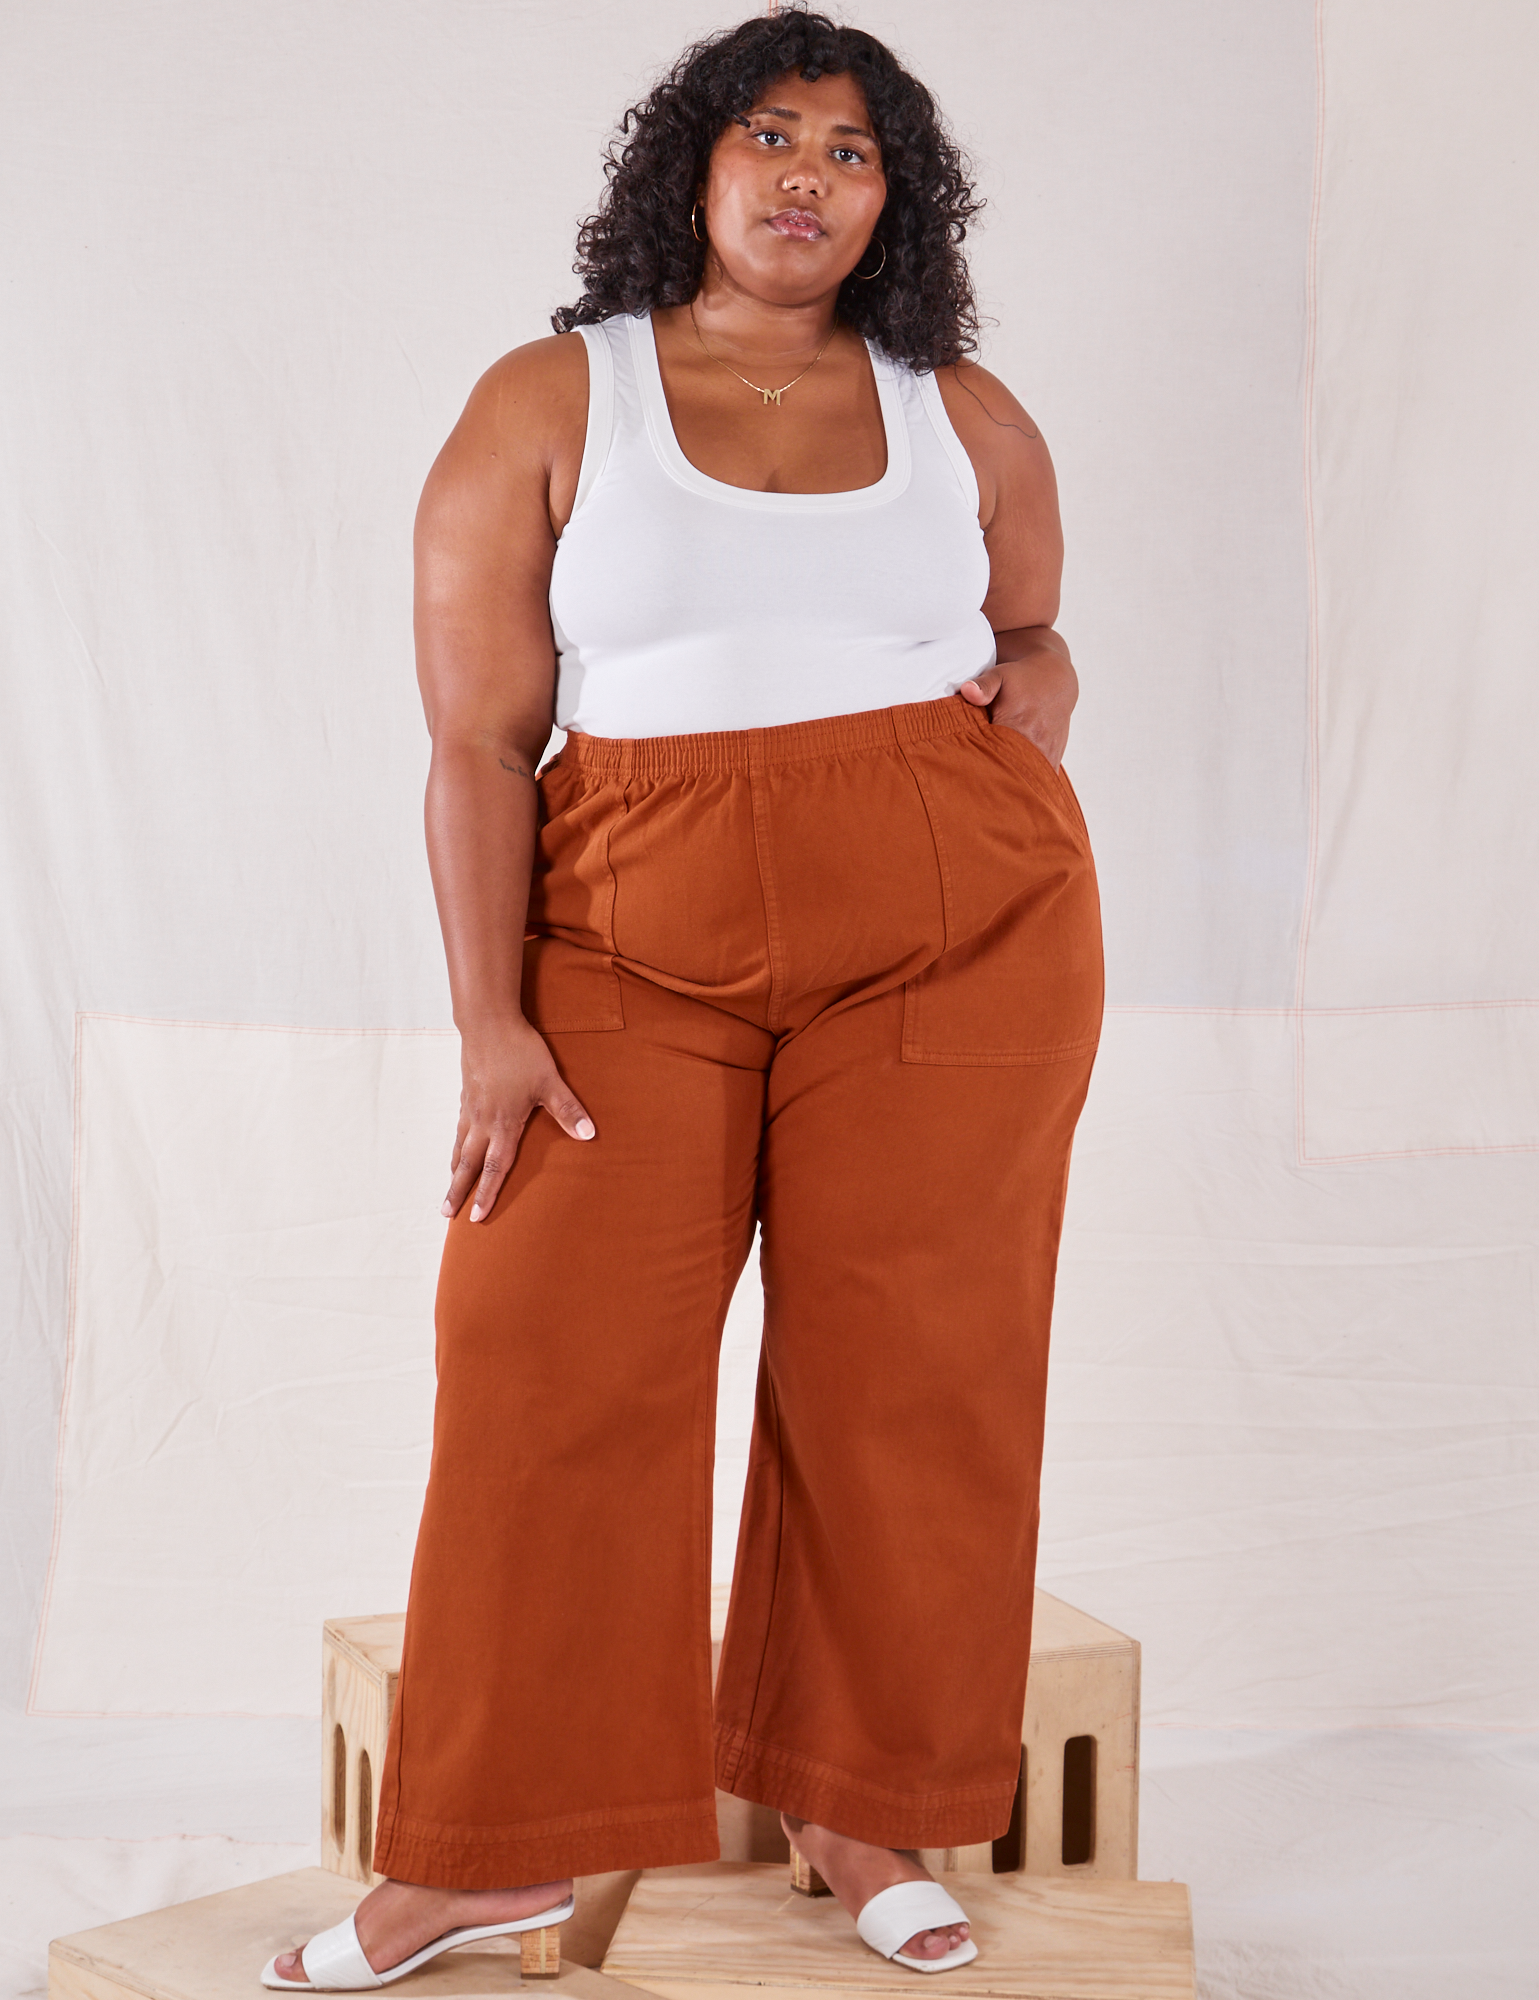 Morgan is 5'5" and wearing 2XL Action Pants in Burnt Terracotta and Cropped Tank Top in vintage tee off-white